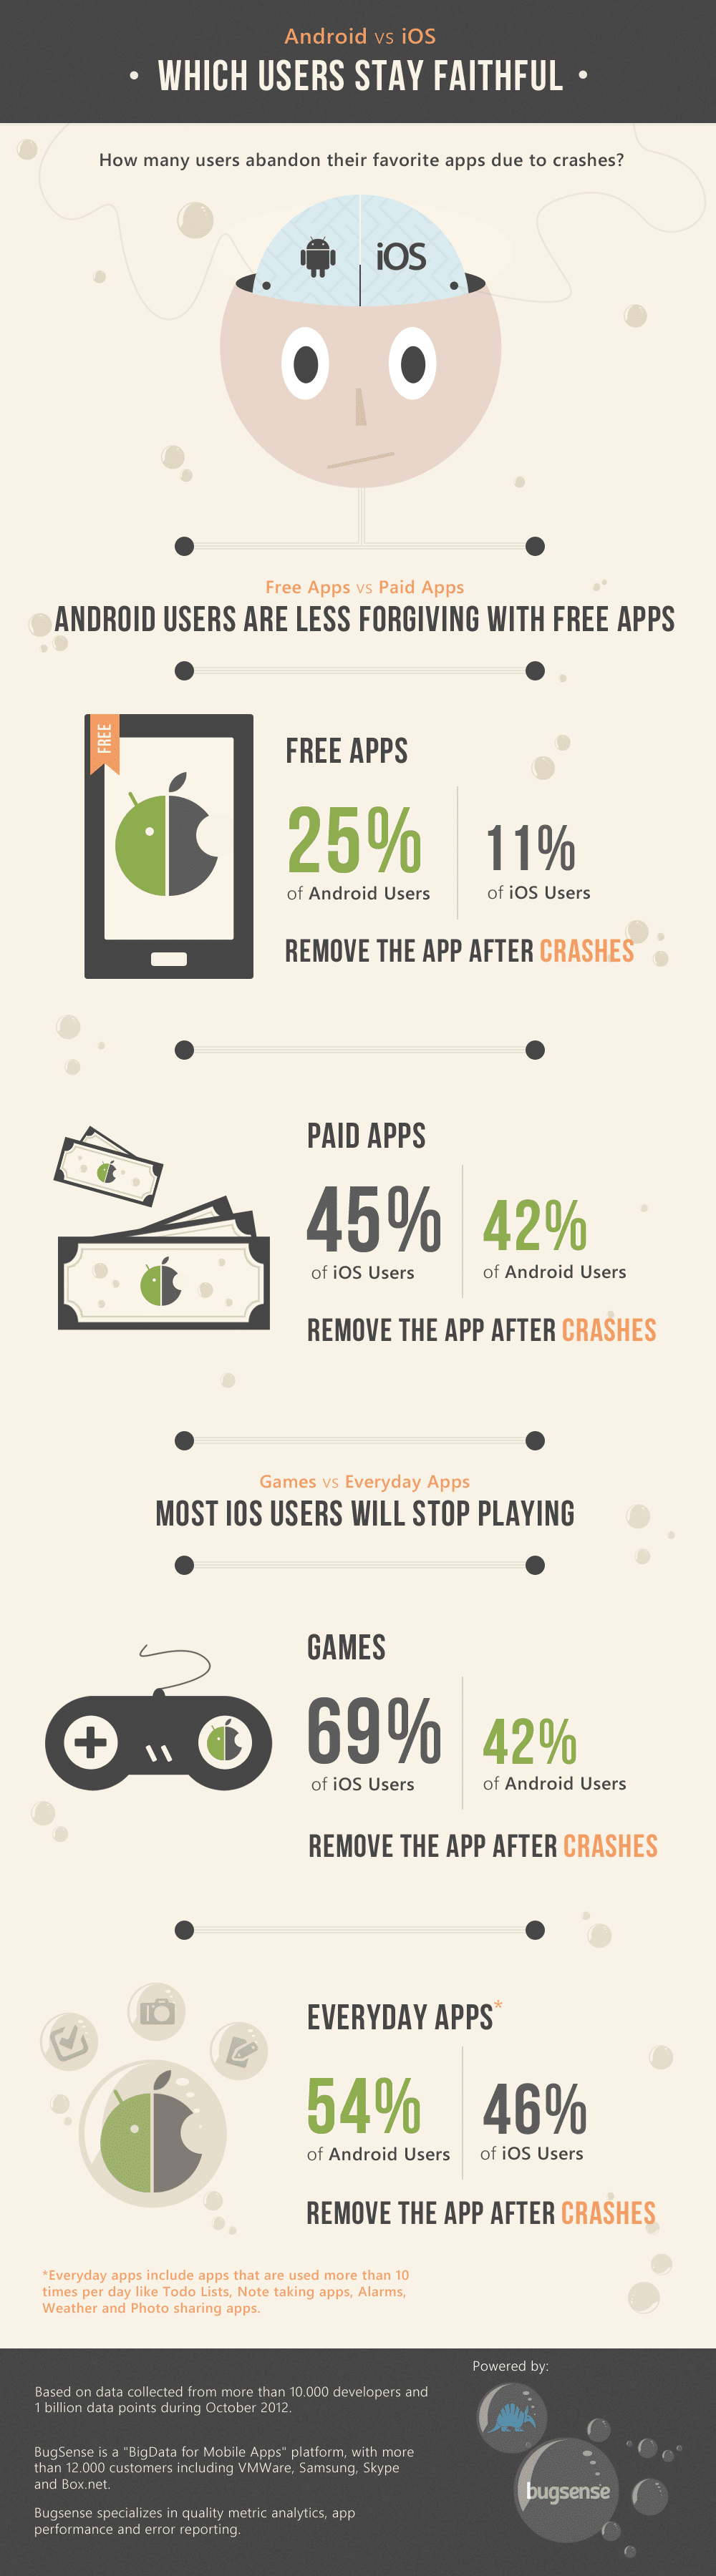 android-vs.-iOS-loyalty-infographic